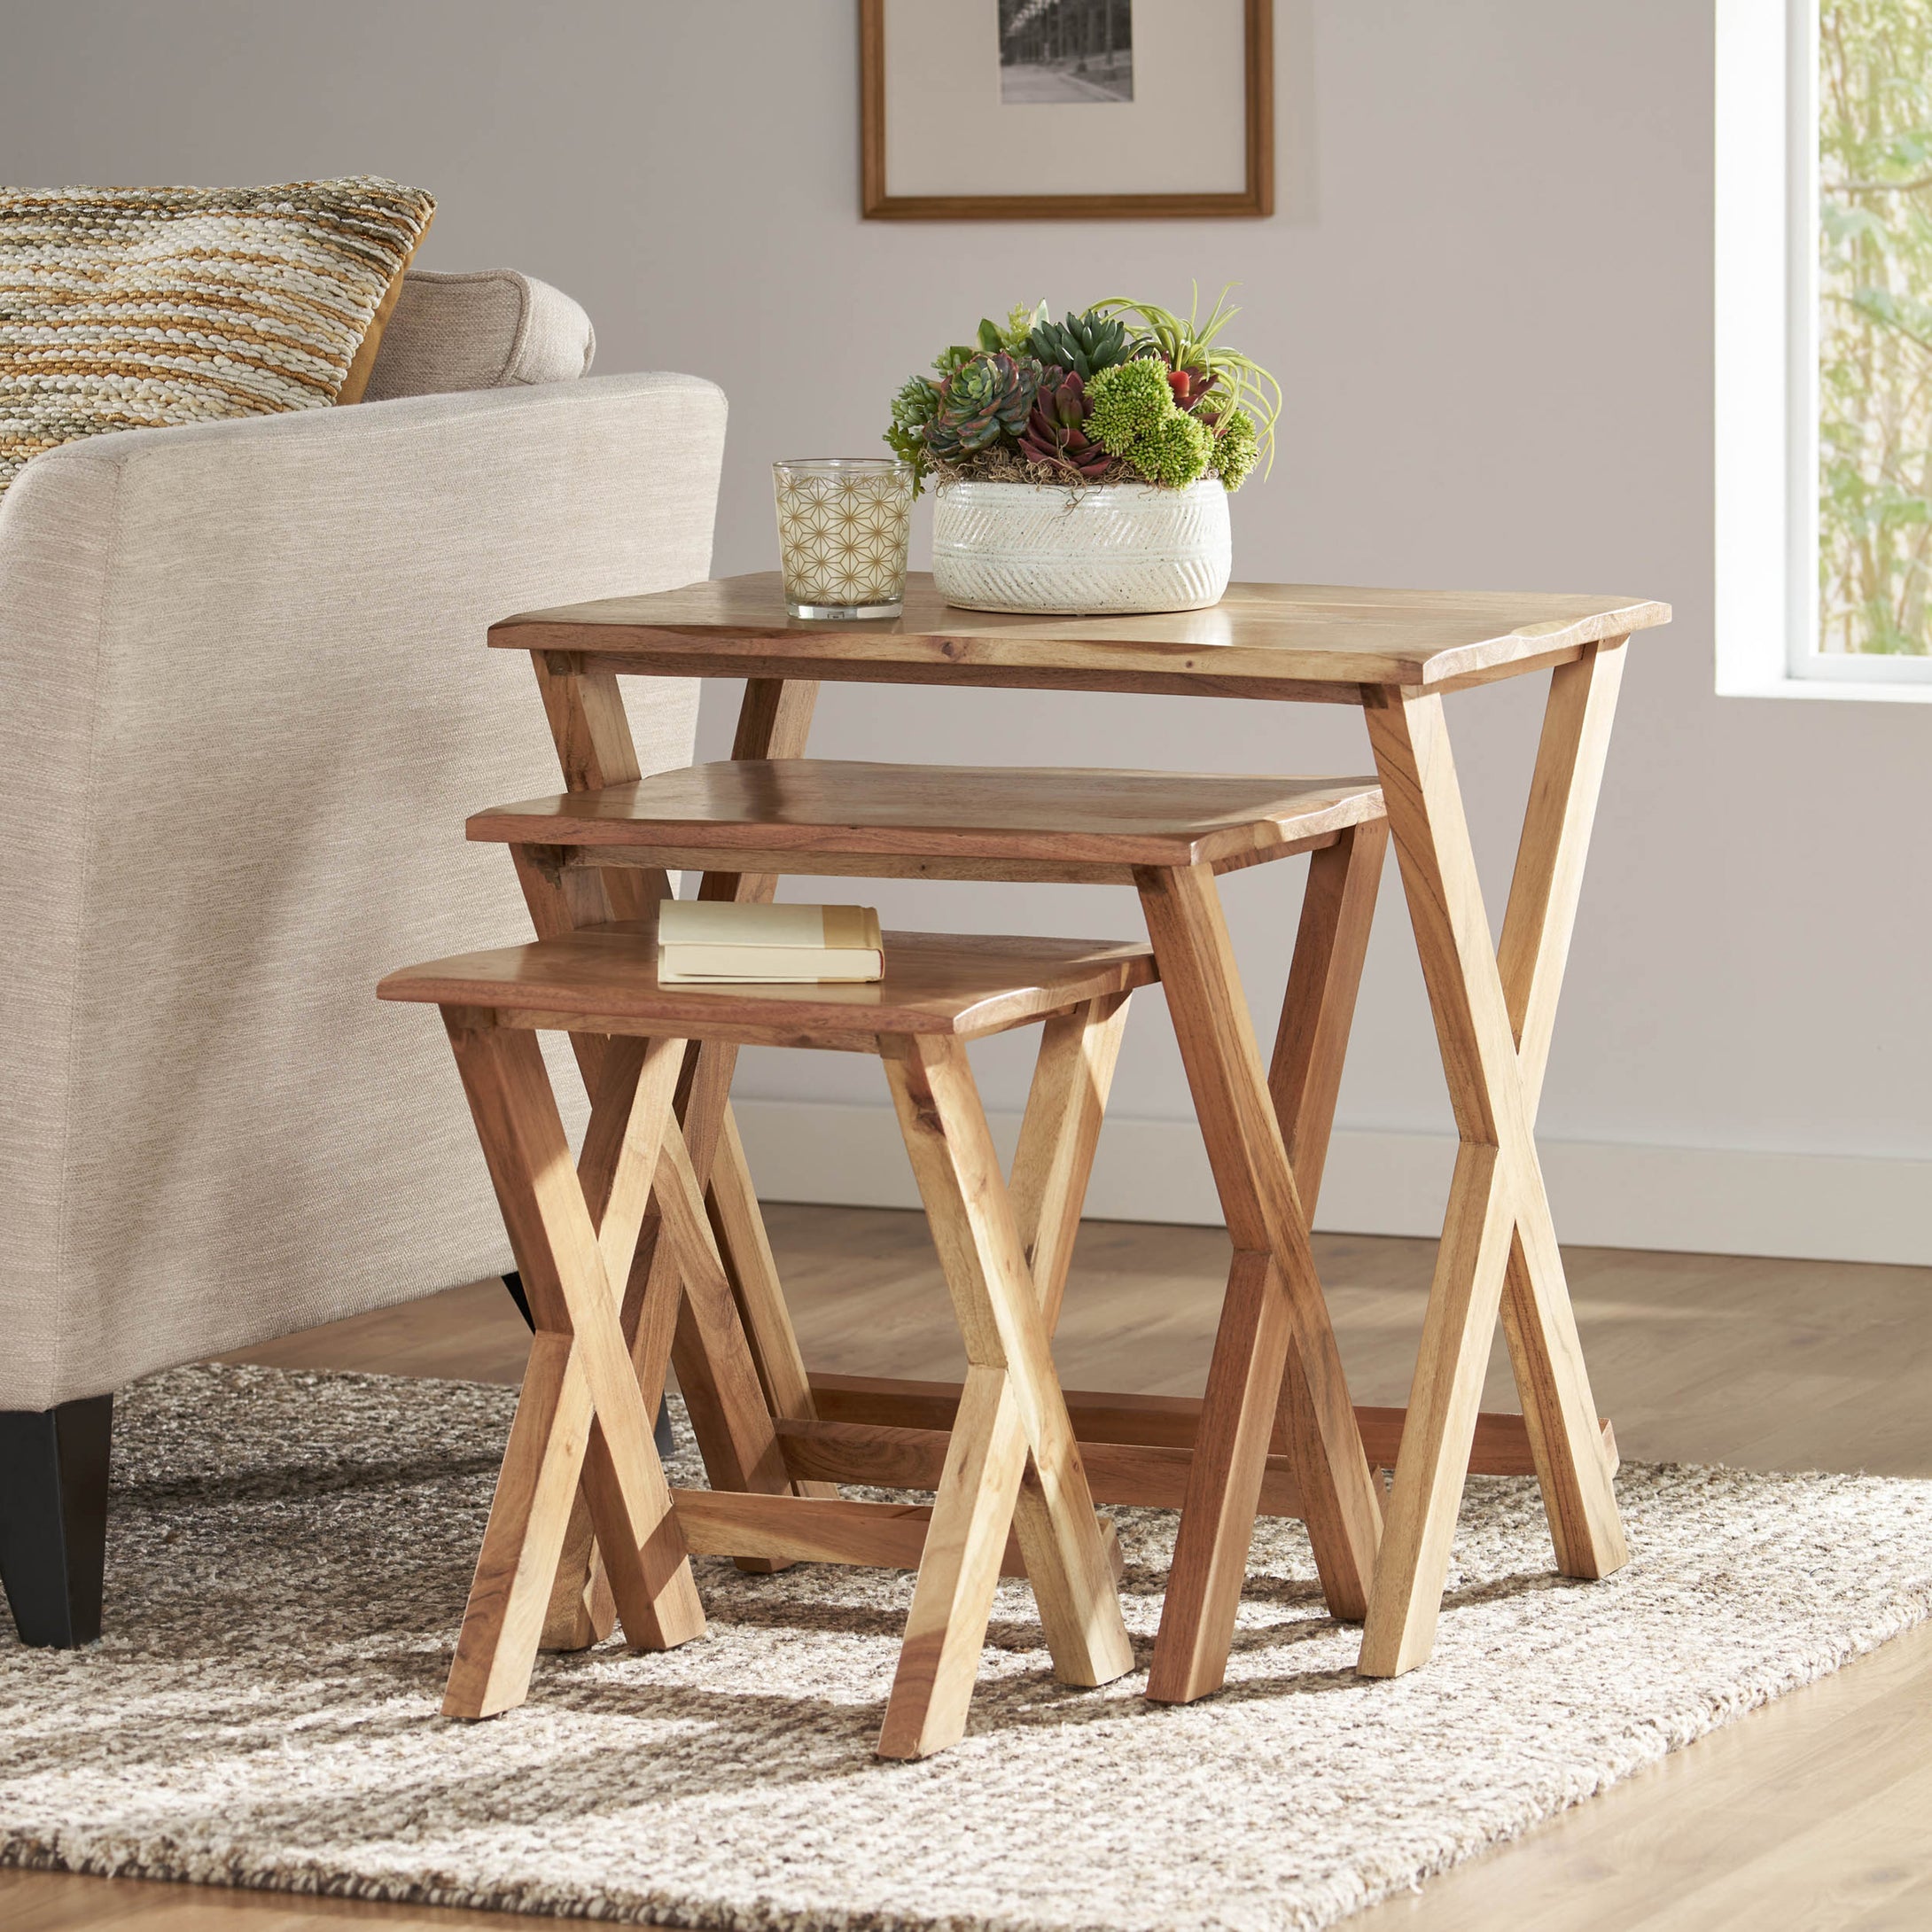 Set of 3 Rustic Style Nesting End Tables, Natural Color